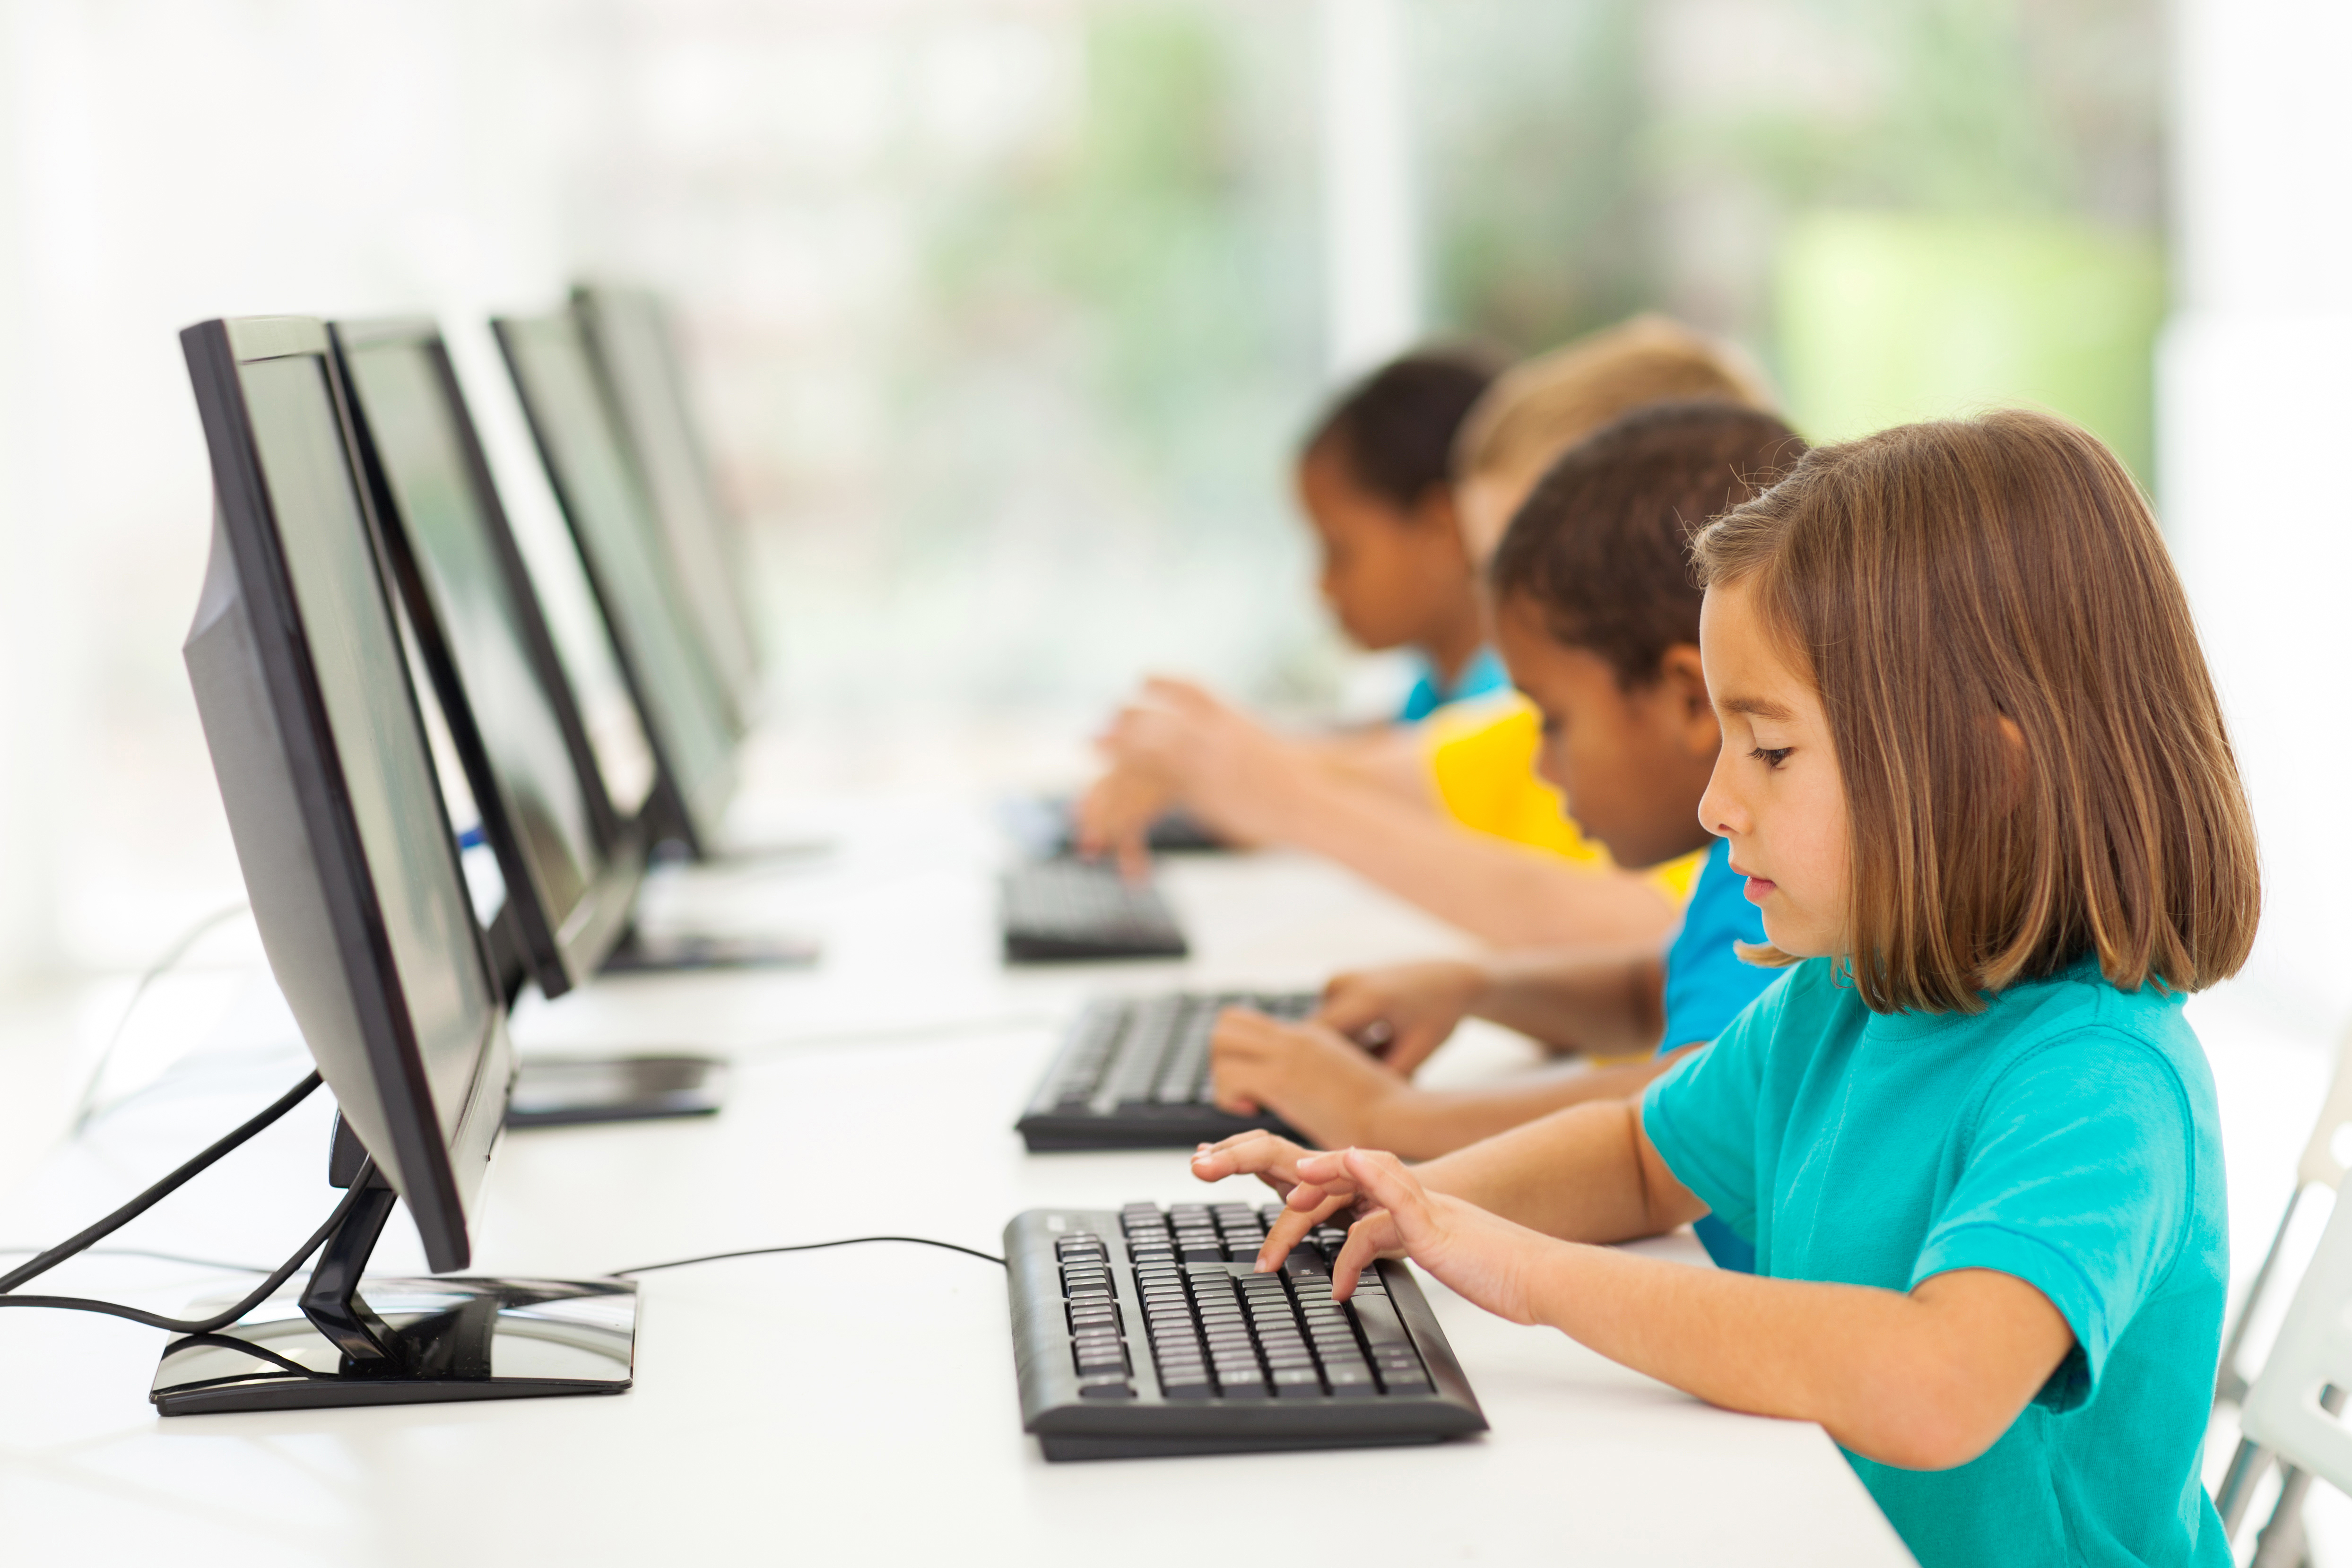 An image of young students using desktop computers